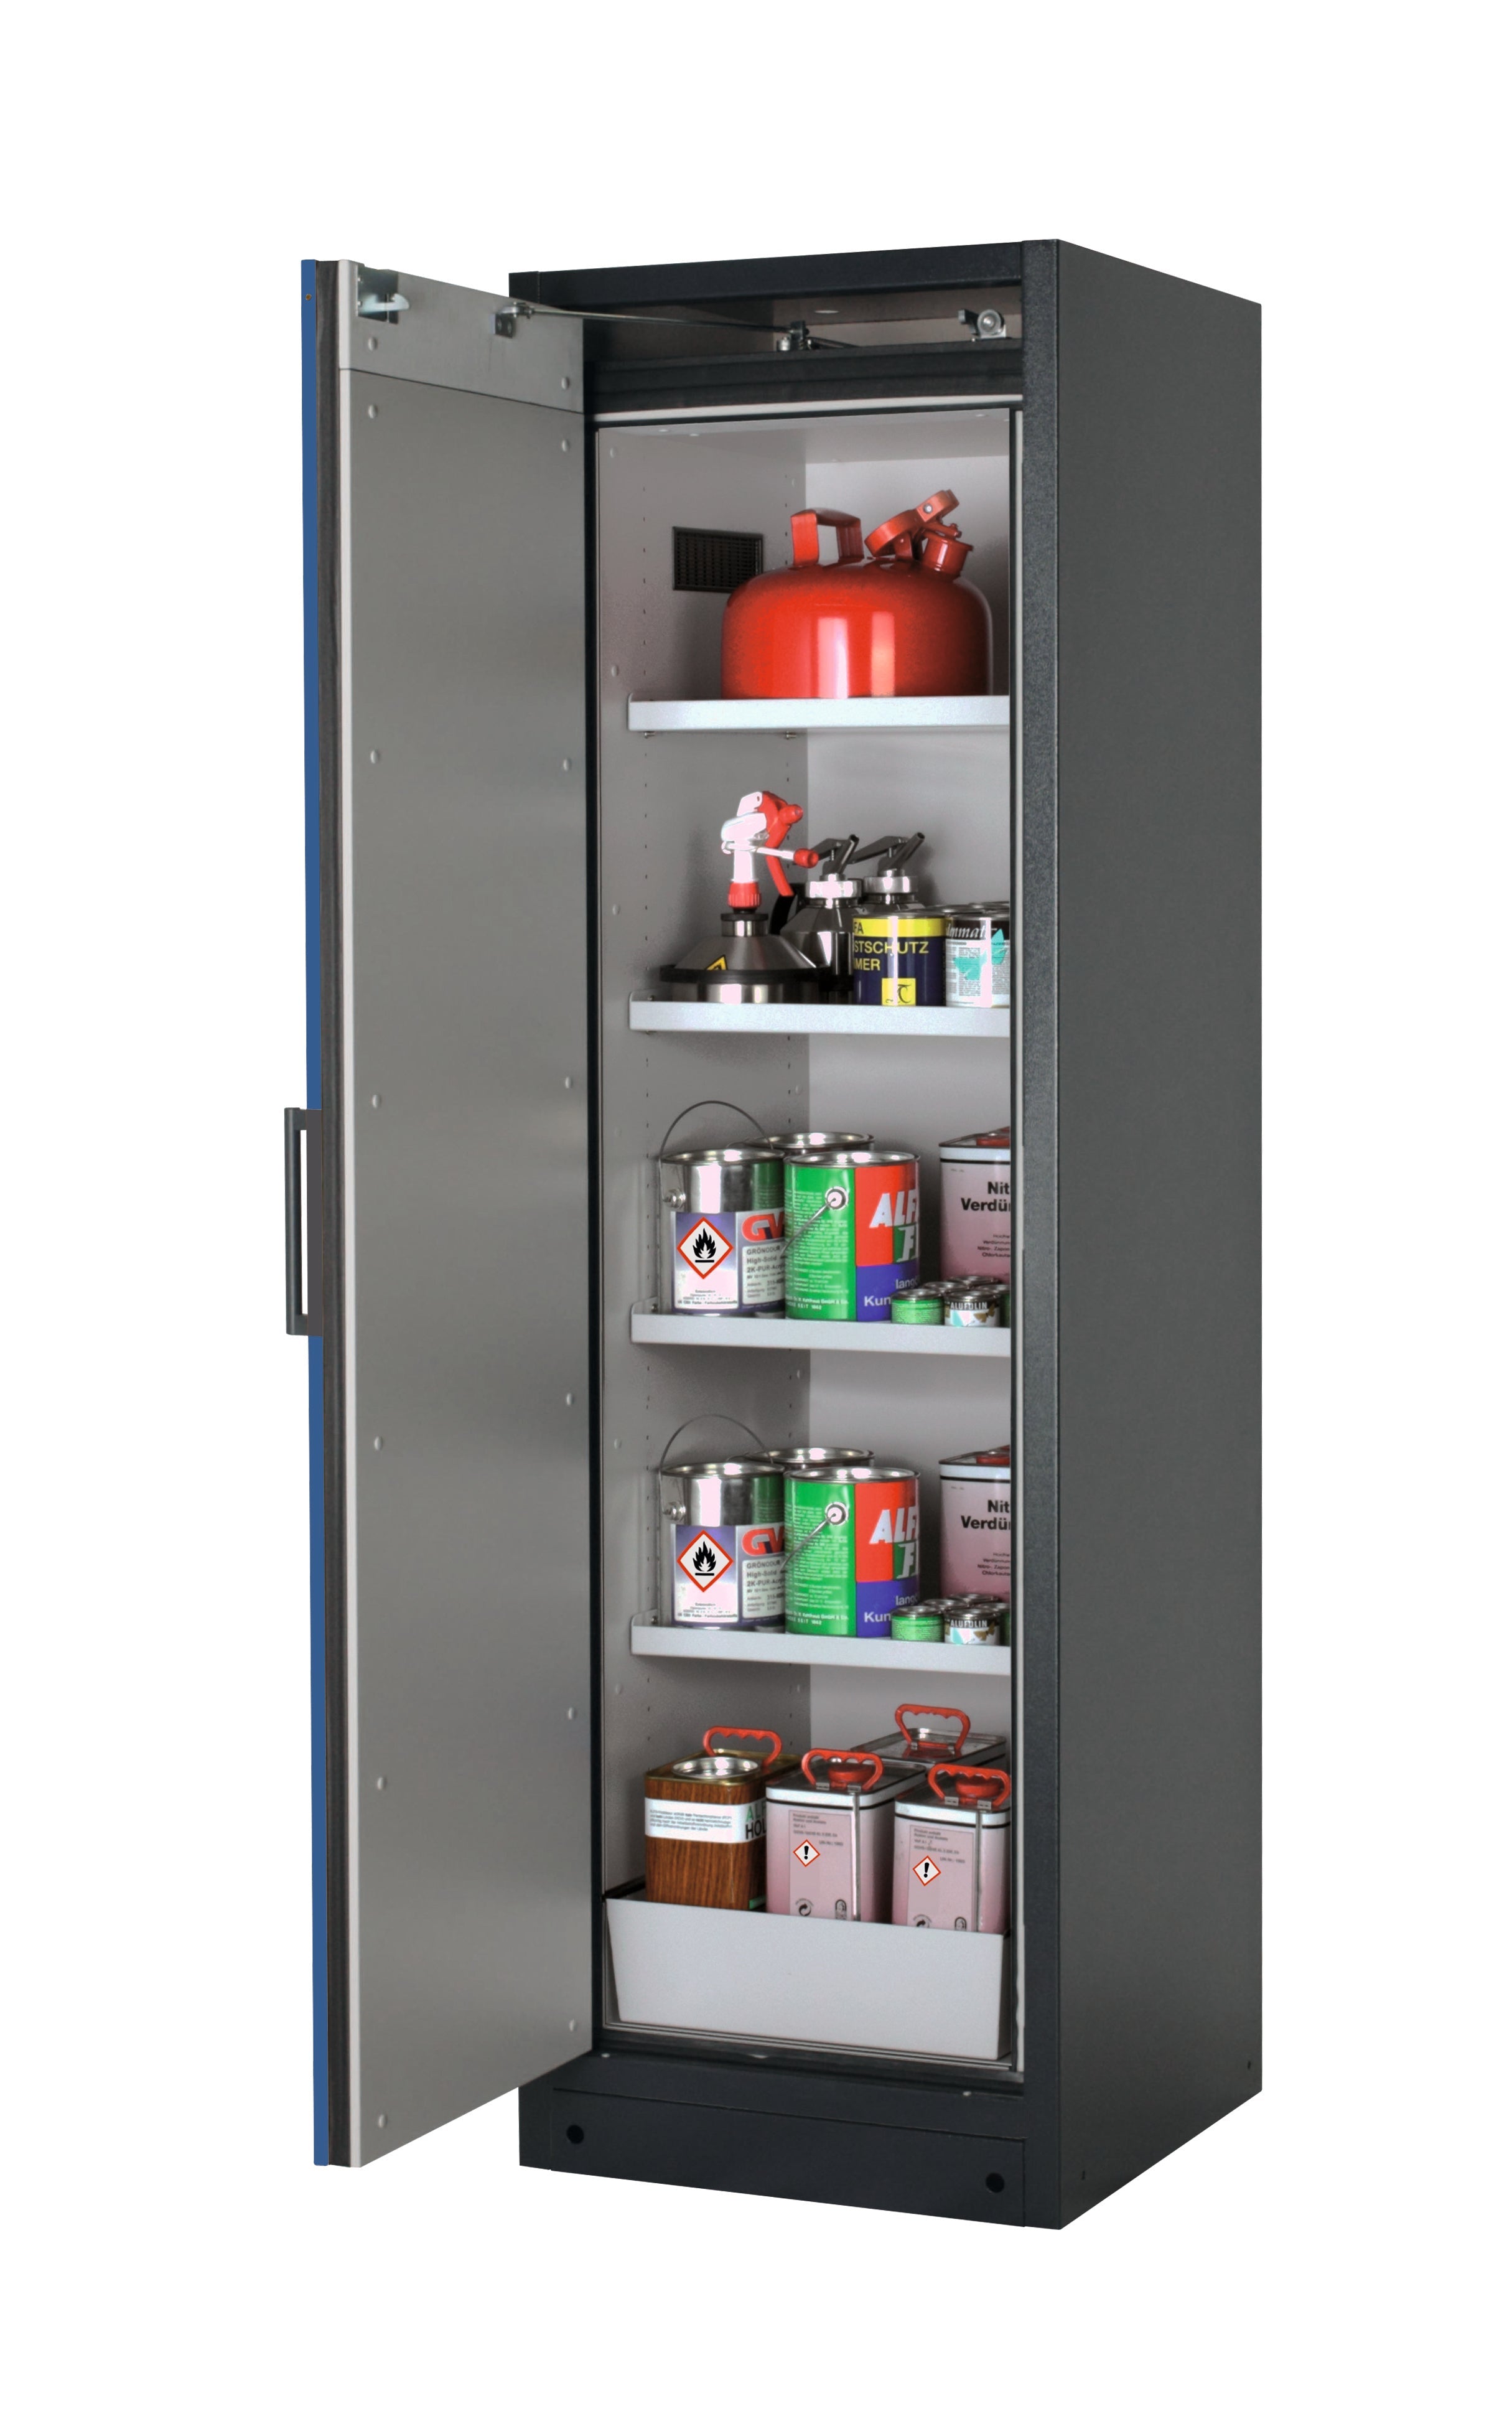 Type 90 safety storage cabinet Q-CLASSIC-90 model Q90.195.060 in gentian blue RAL 5010 with 4x shelf standard (sheet steel),